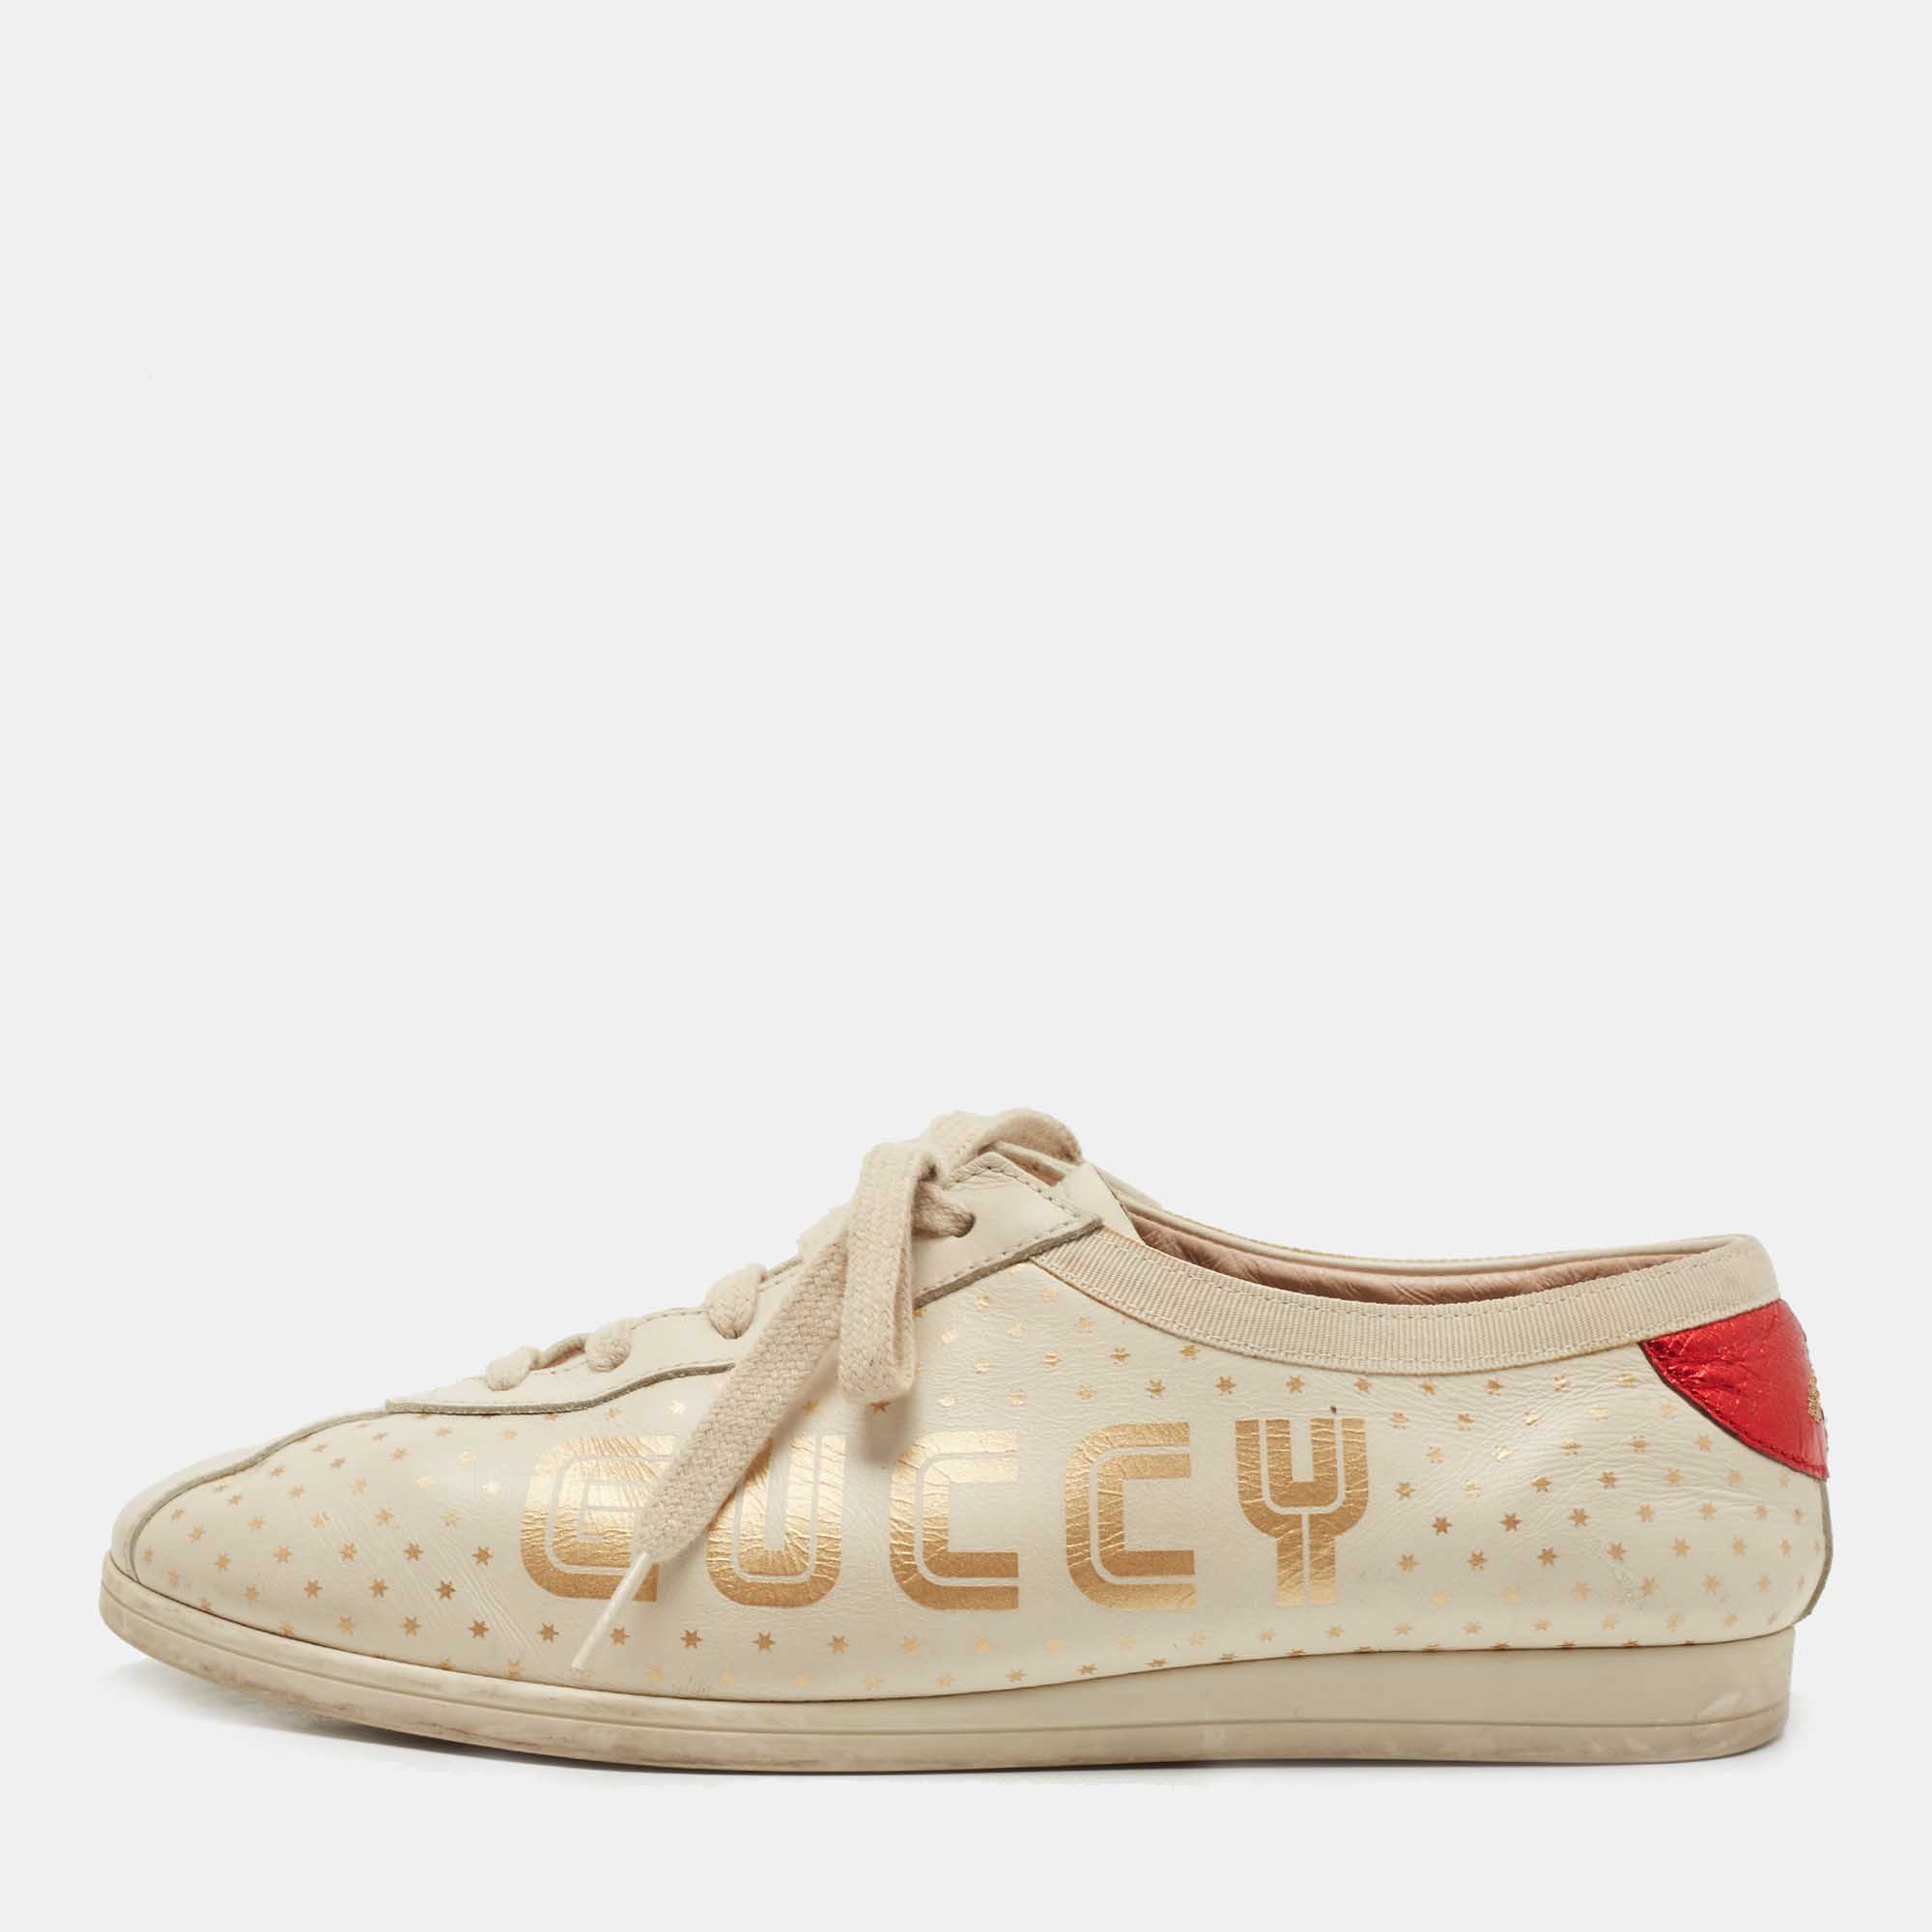 Pre-owned Gucci Beige Leather Falacer Guccy Trainers Size 37